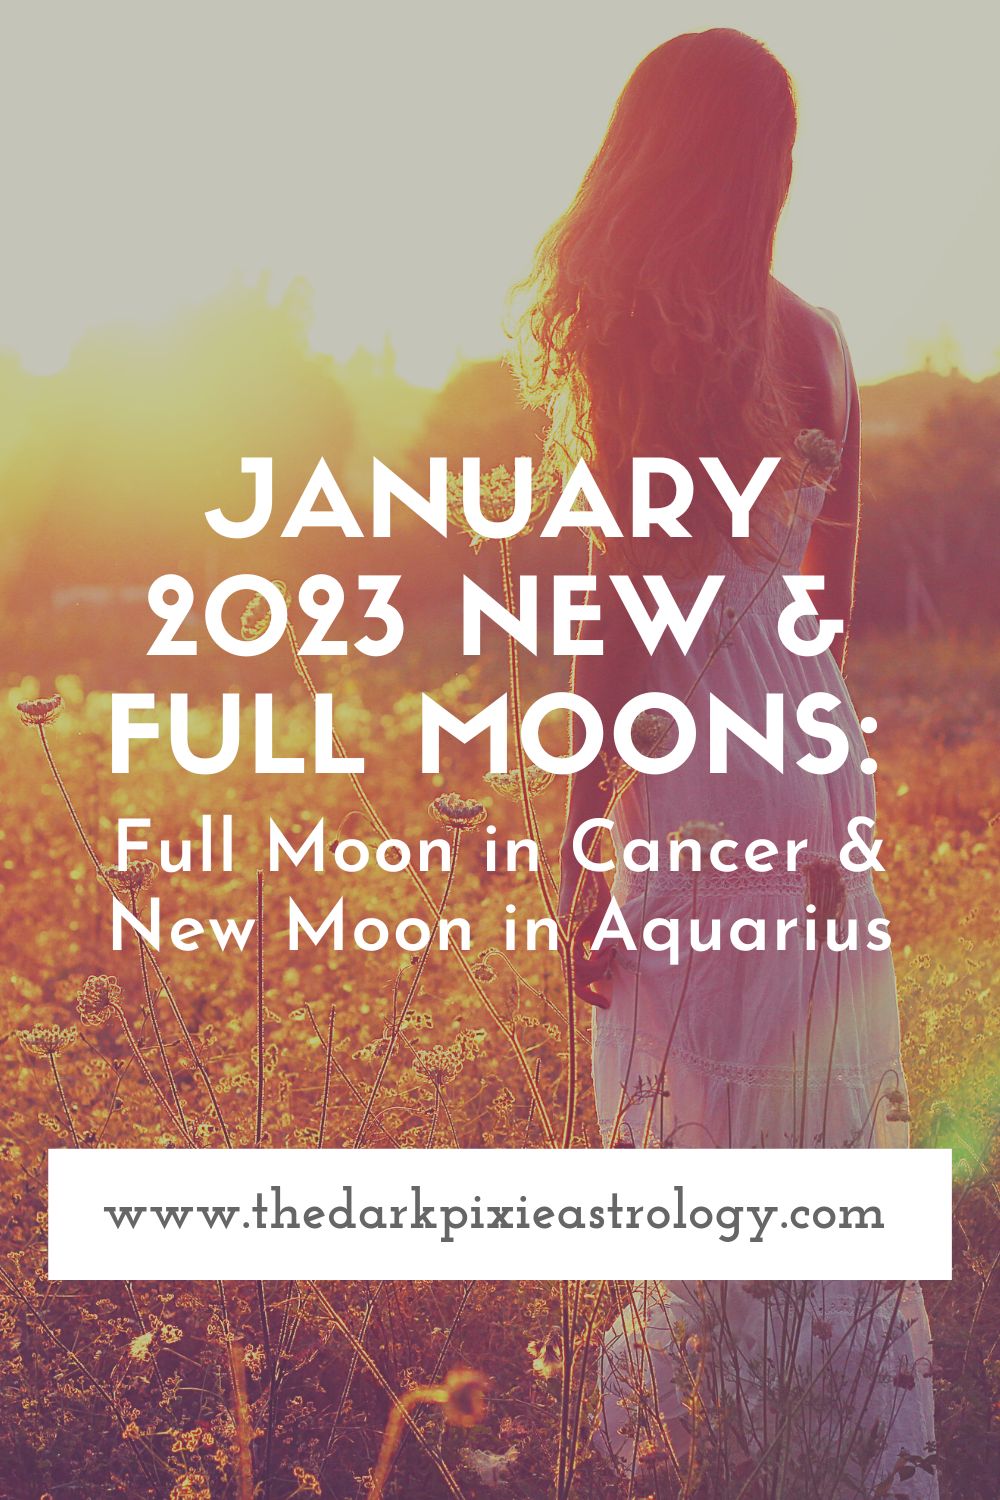 January 2023 New & Full Moons: Full Moon in Cancer & New Moon in Aquarius - The Dark Pixie Astrology